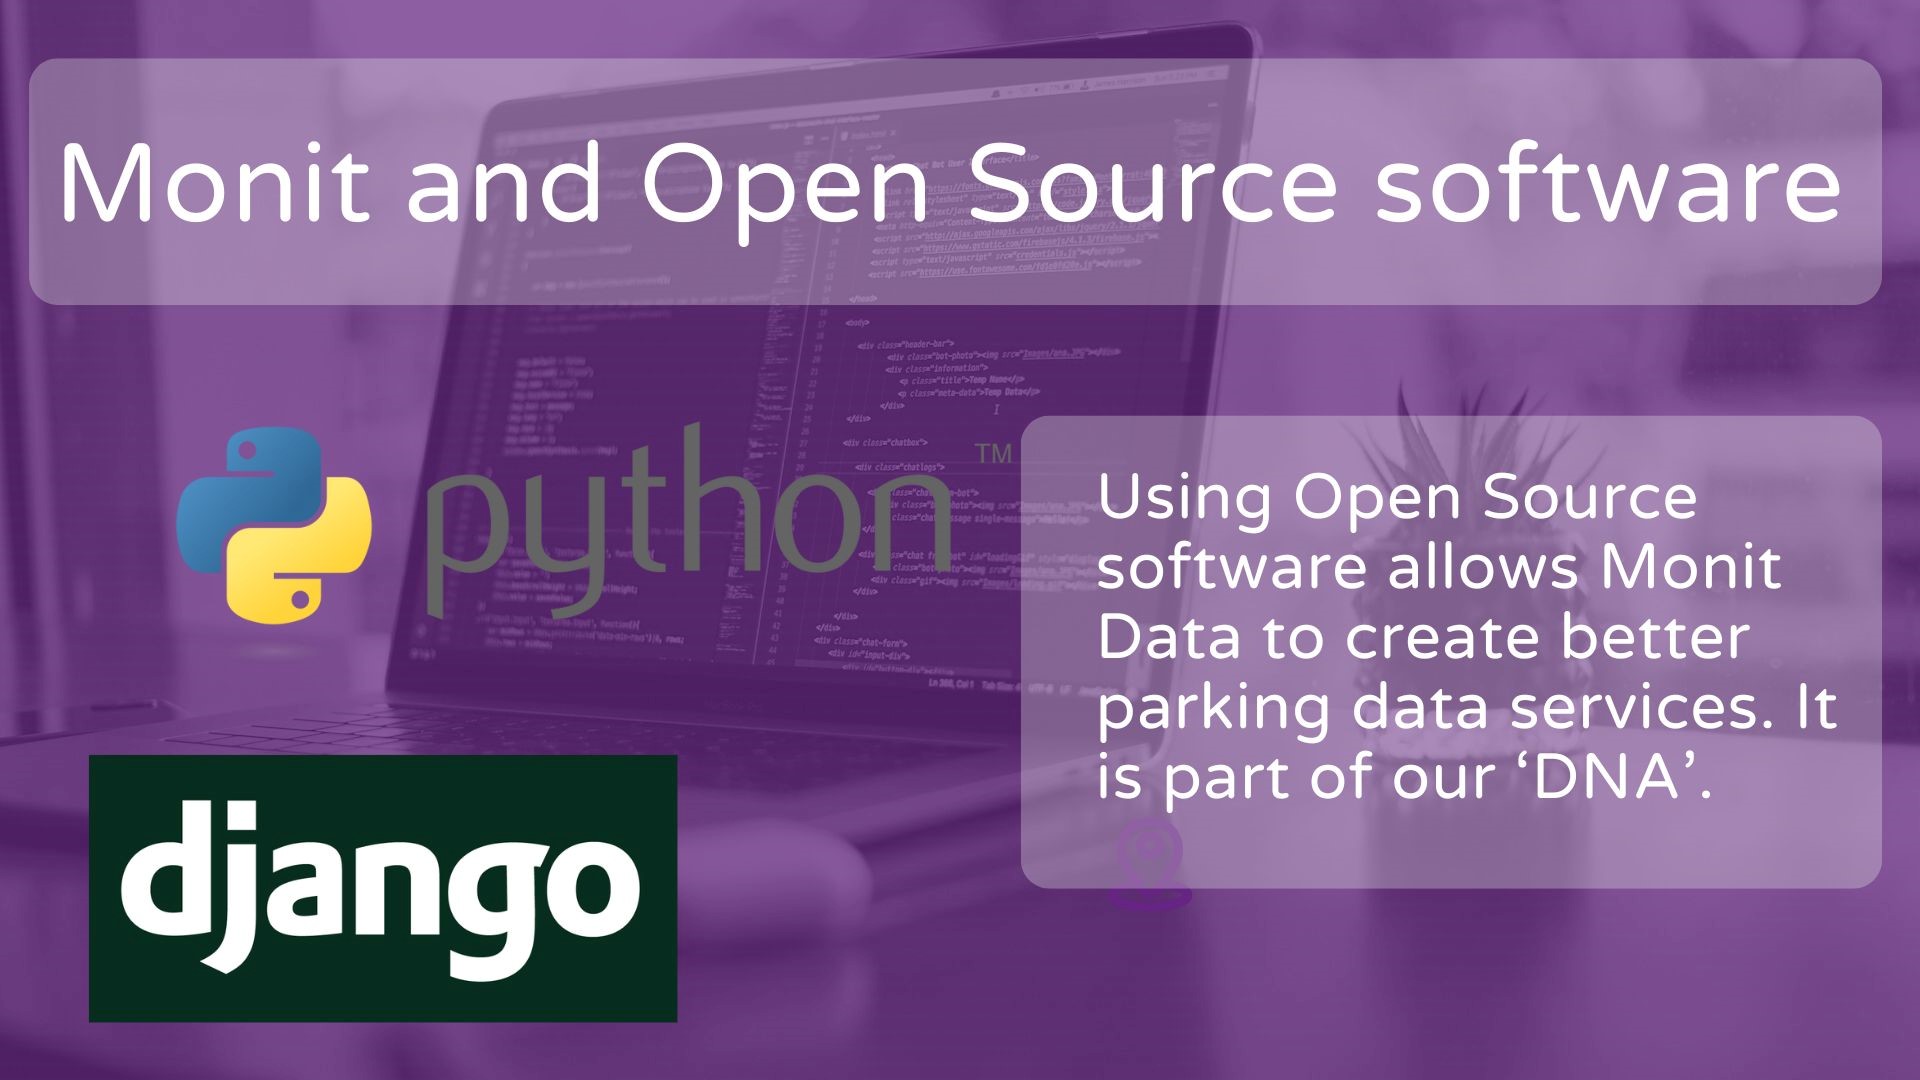 Monit Data uses Open Source software as foundation for our services.